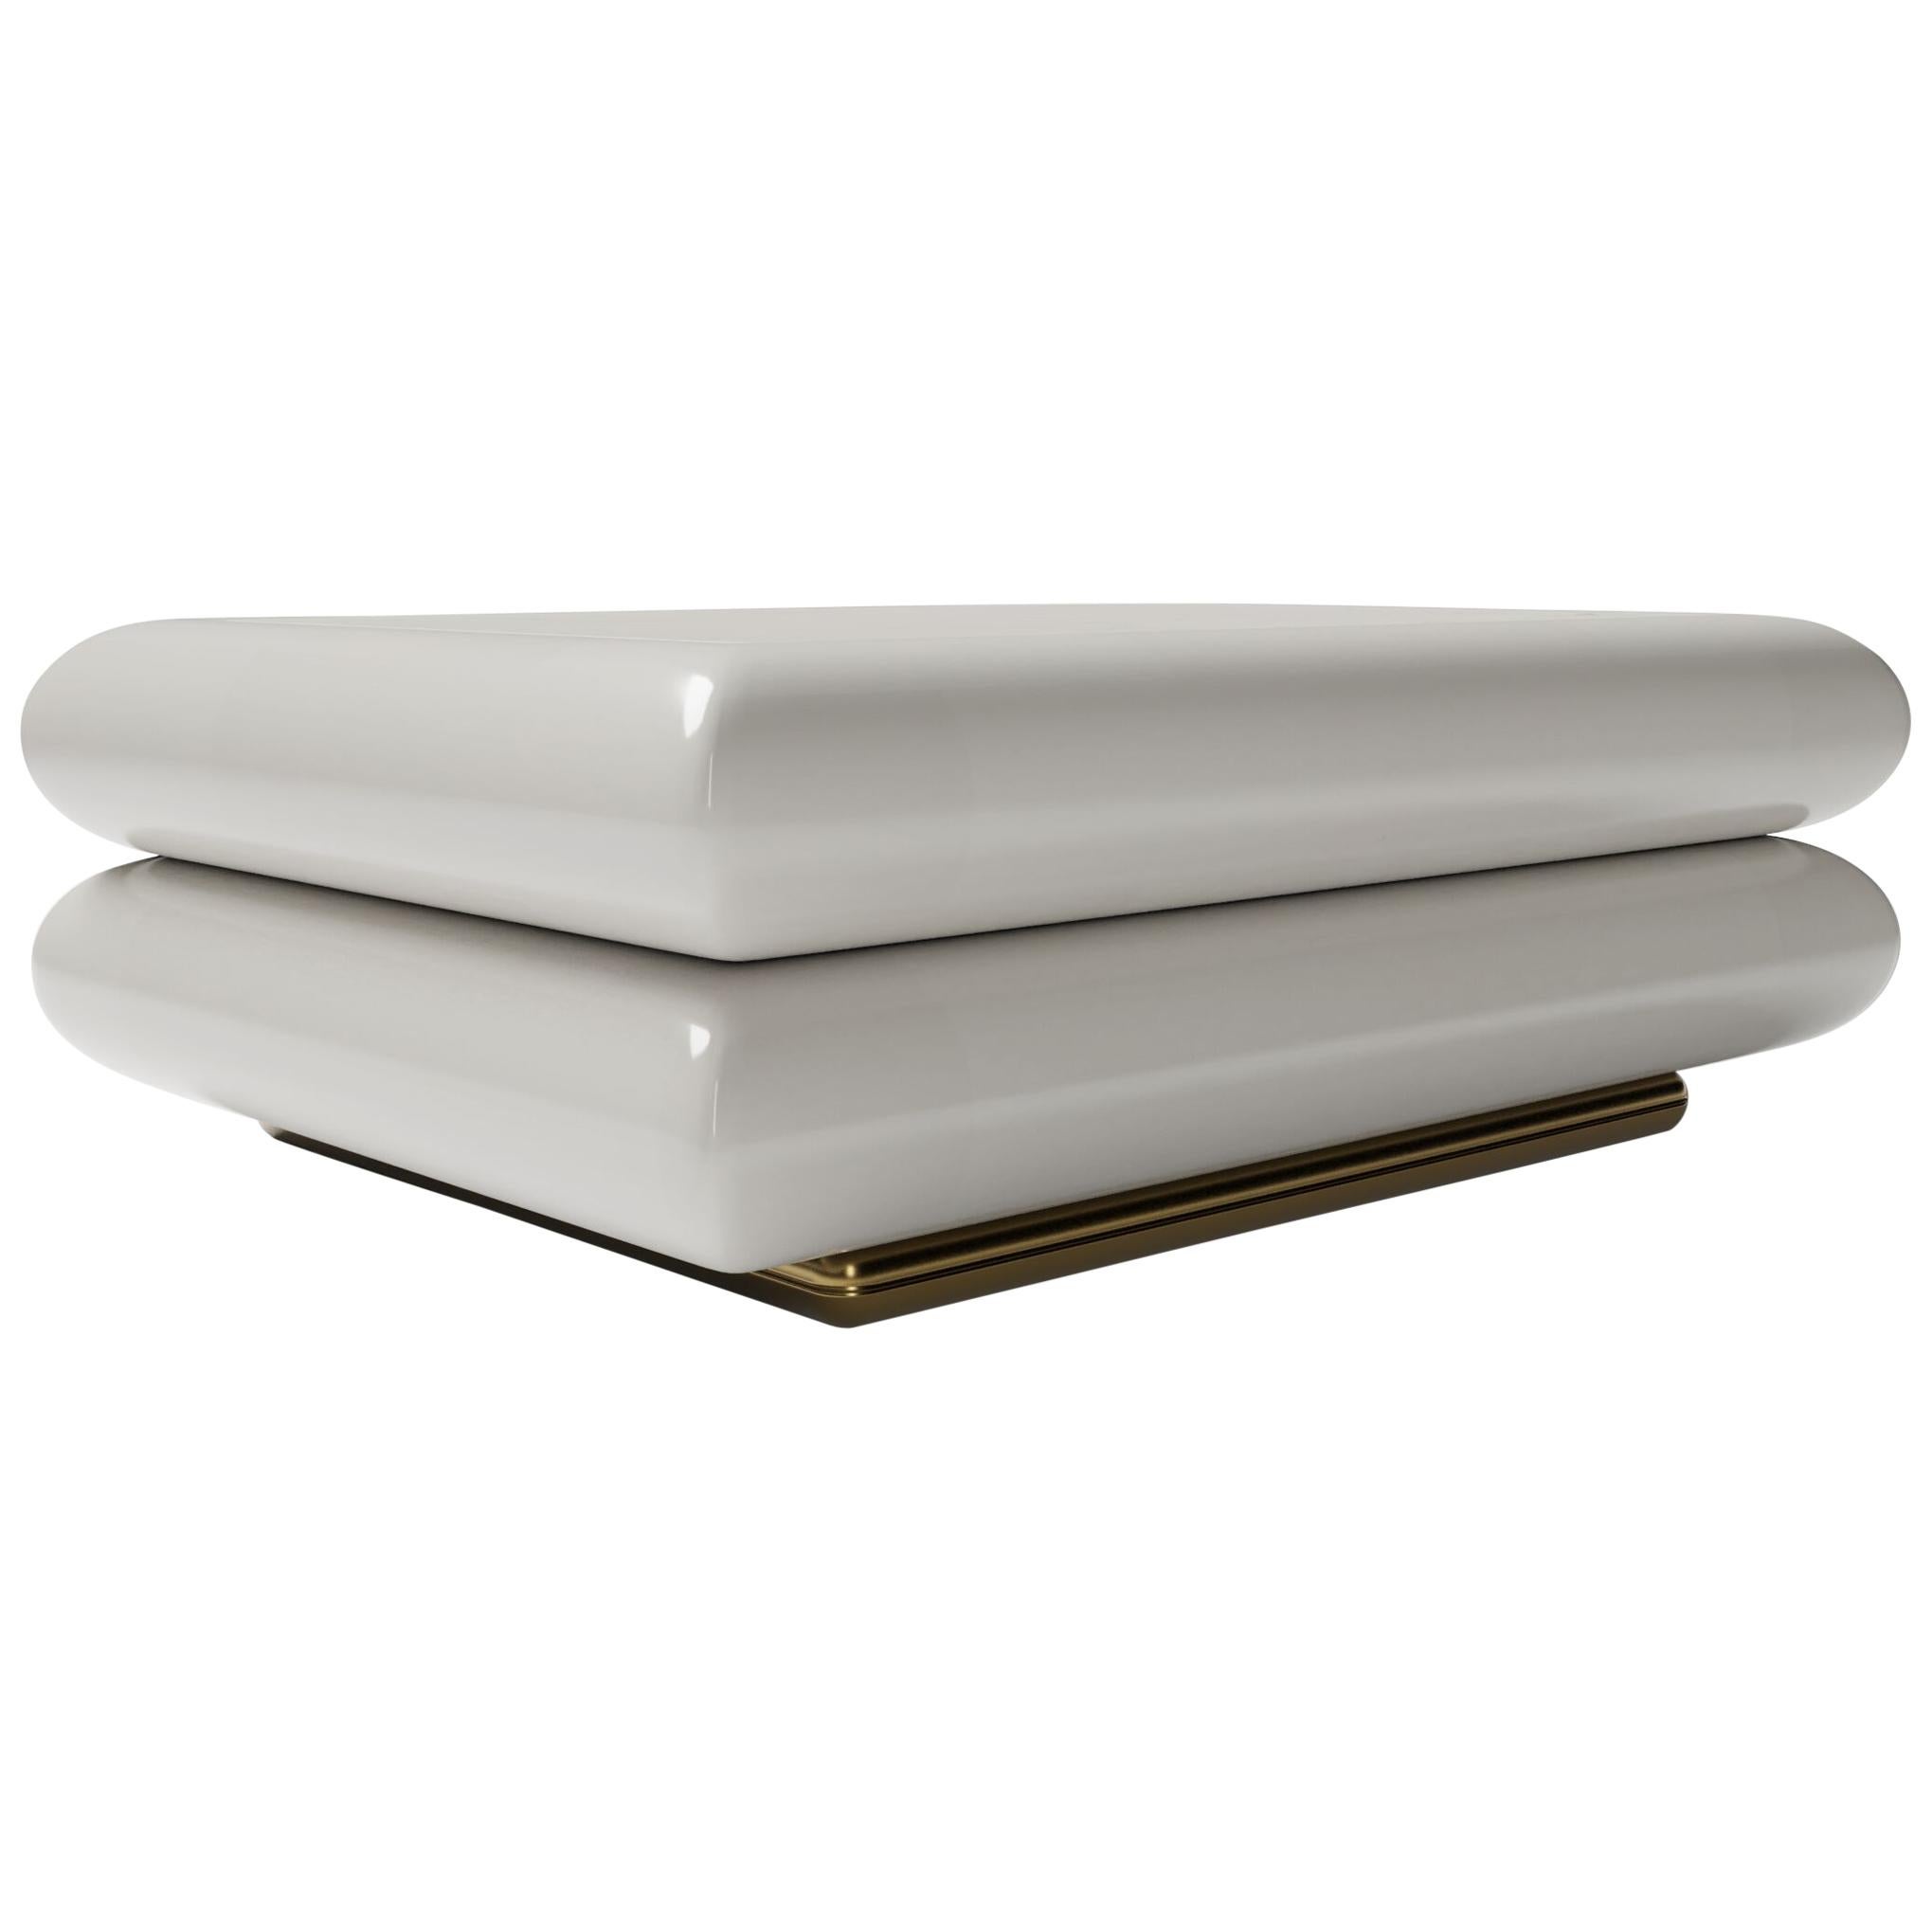 TOPANGA COFFEE TABLE - Modern Design in a Pale Grey Lacquer with a Metallic Base